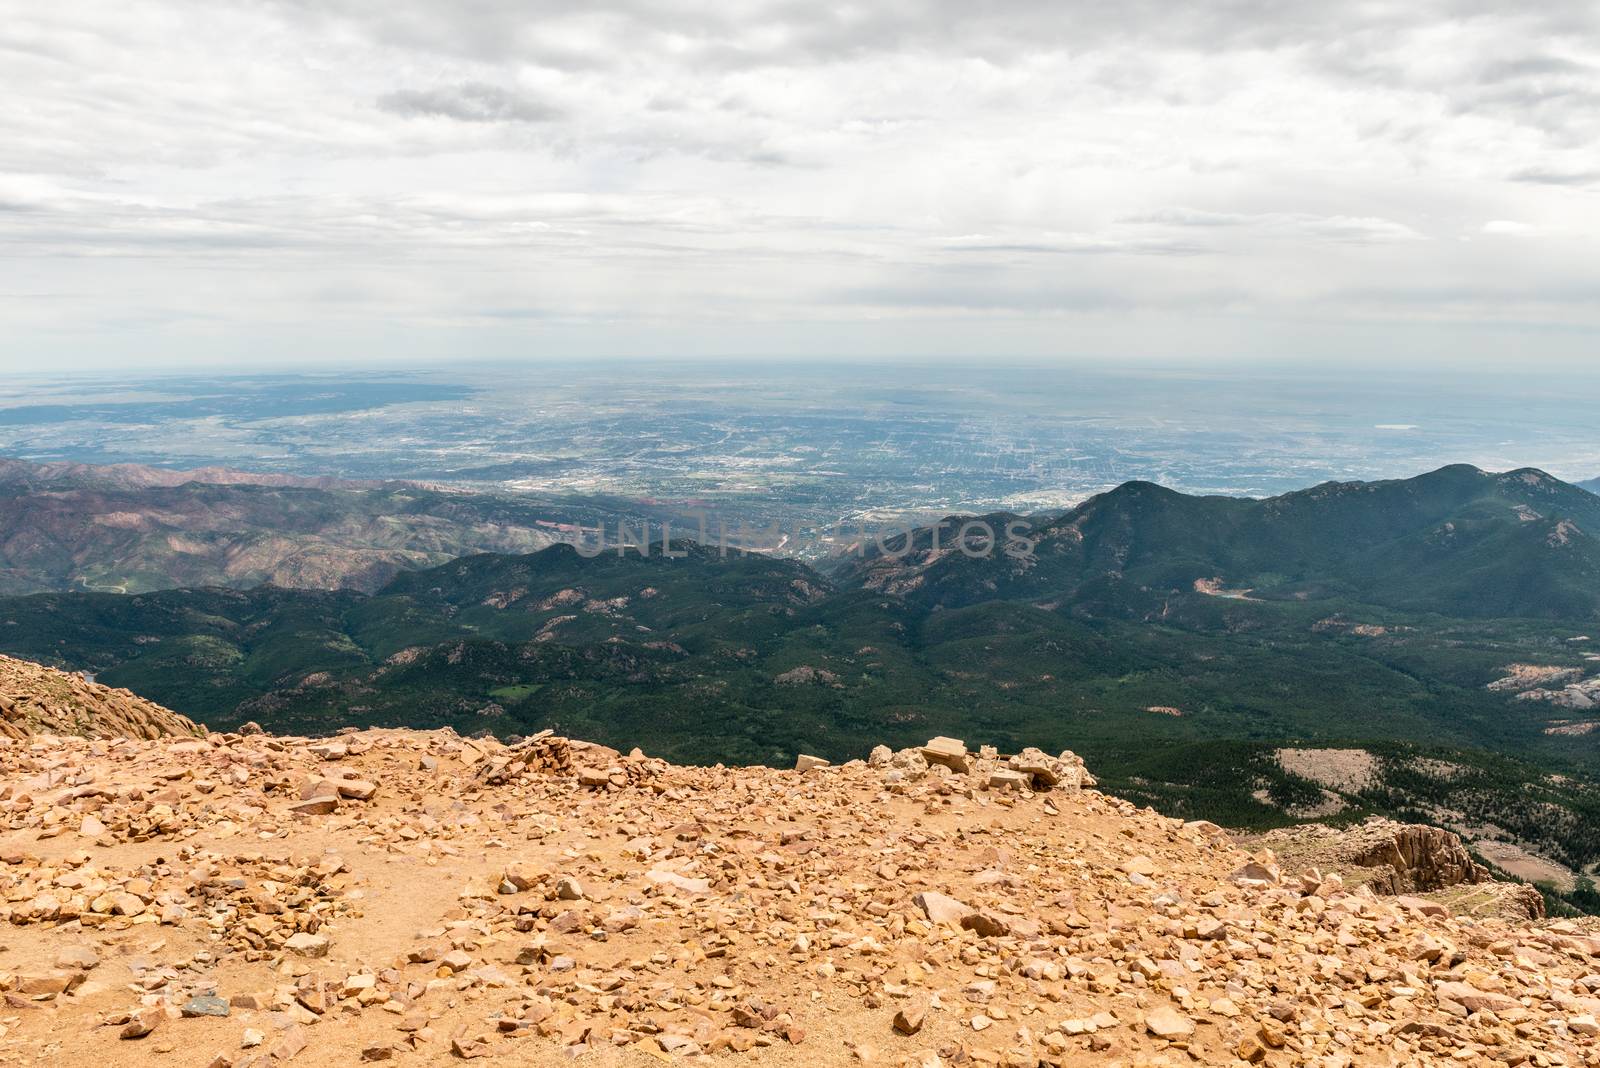 View from the top of Pikes Peak in Pike National Forest, Colorado